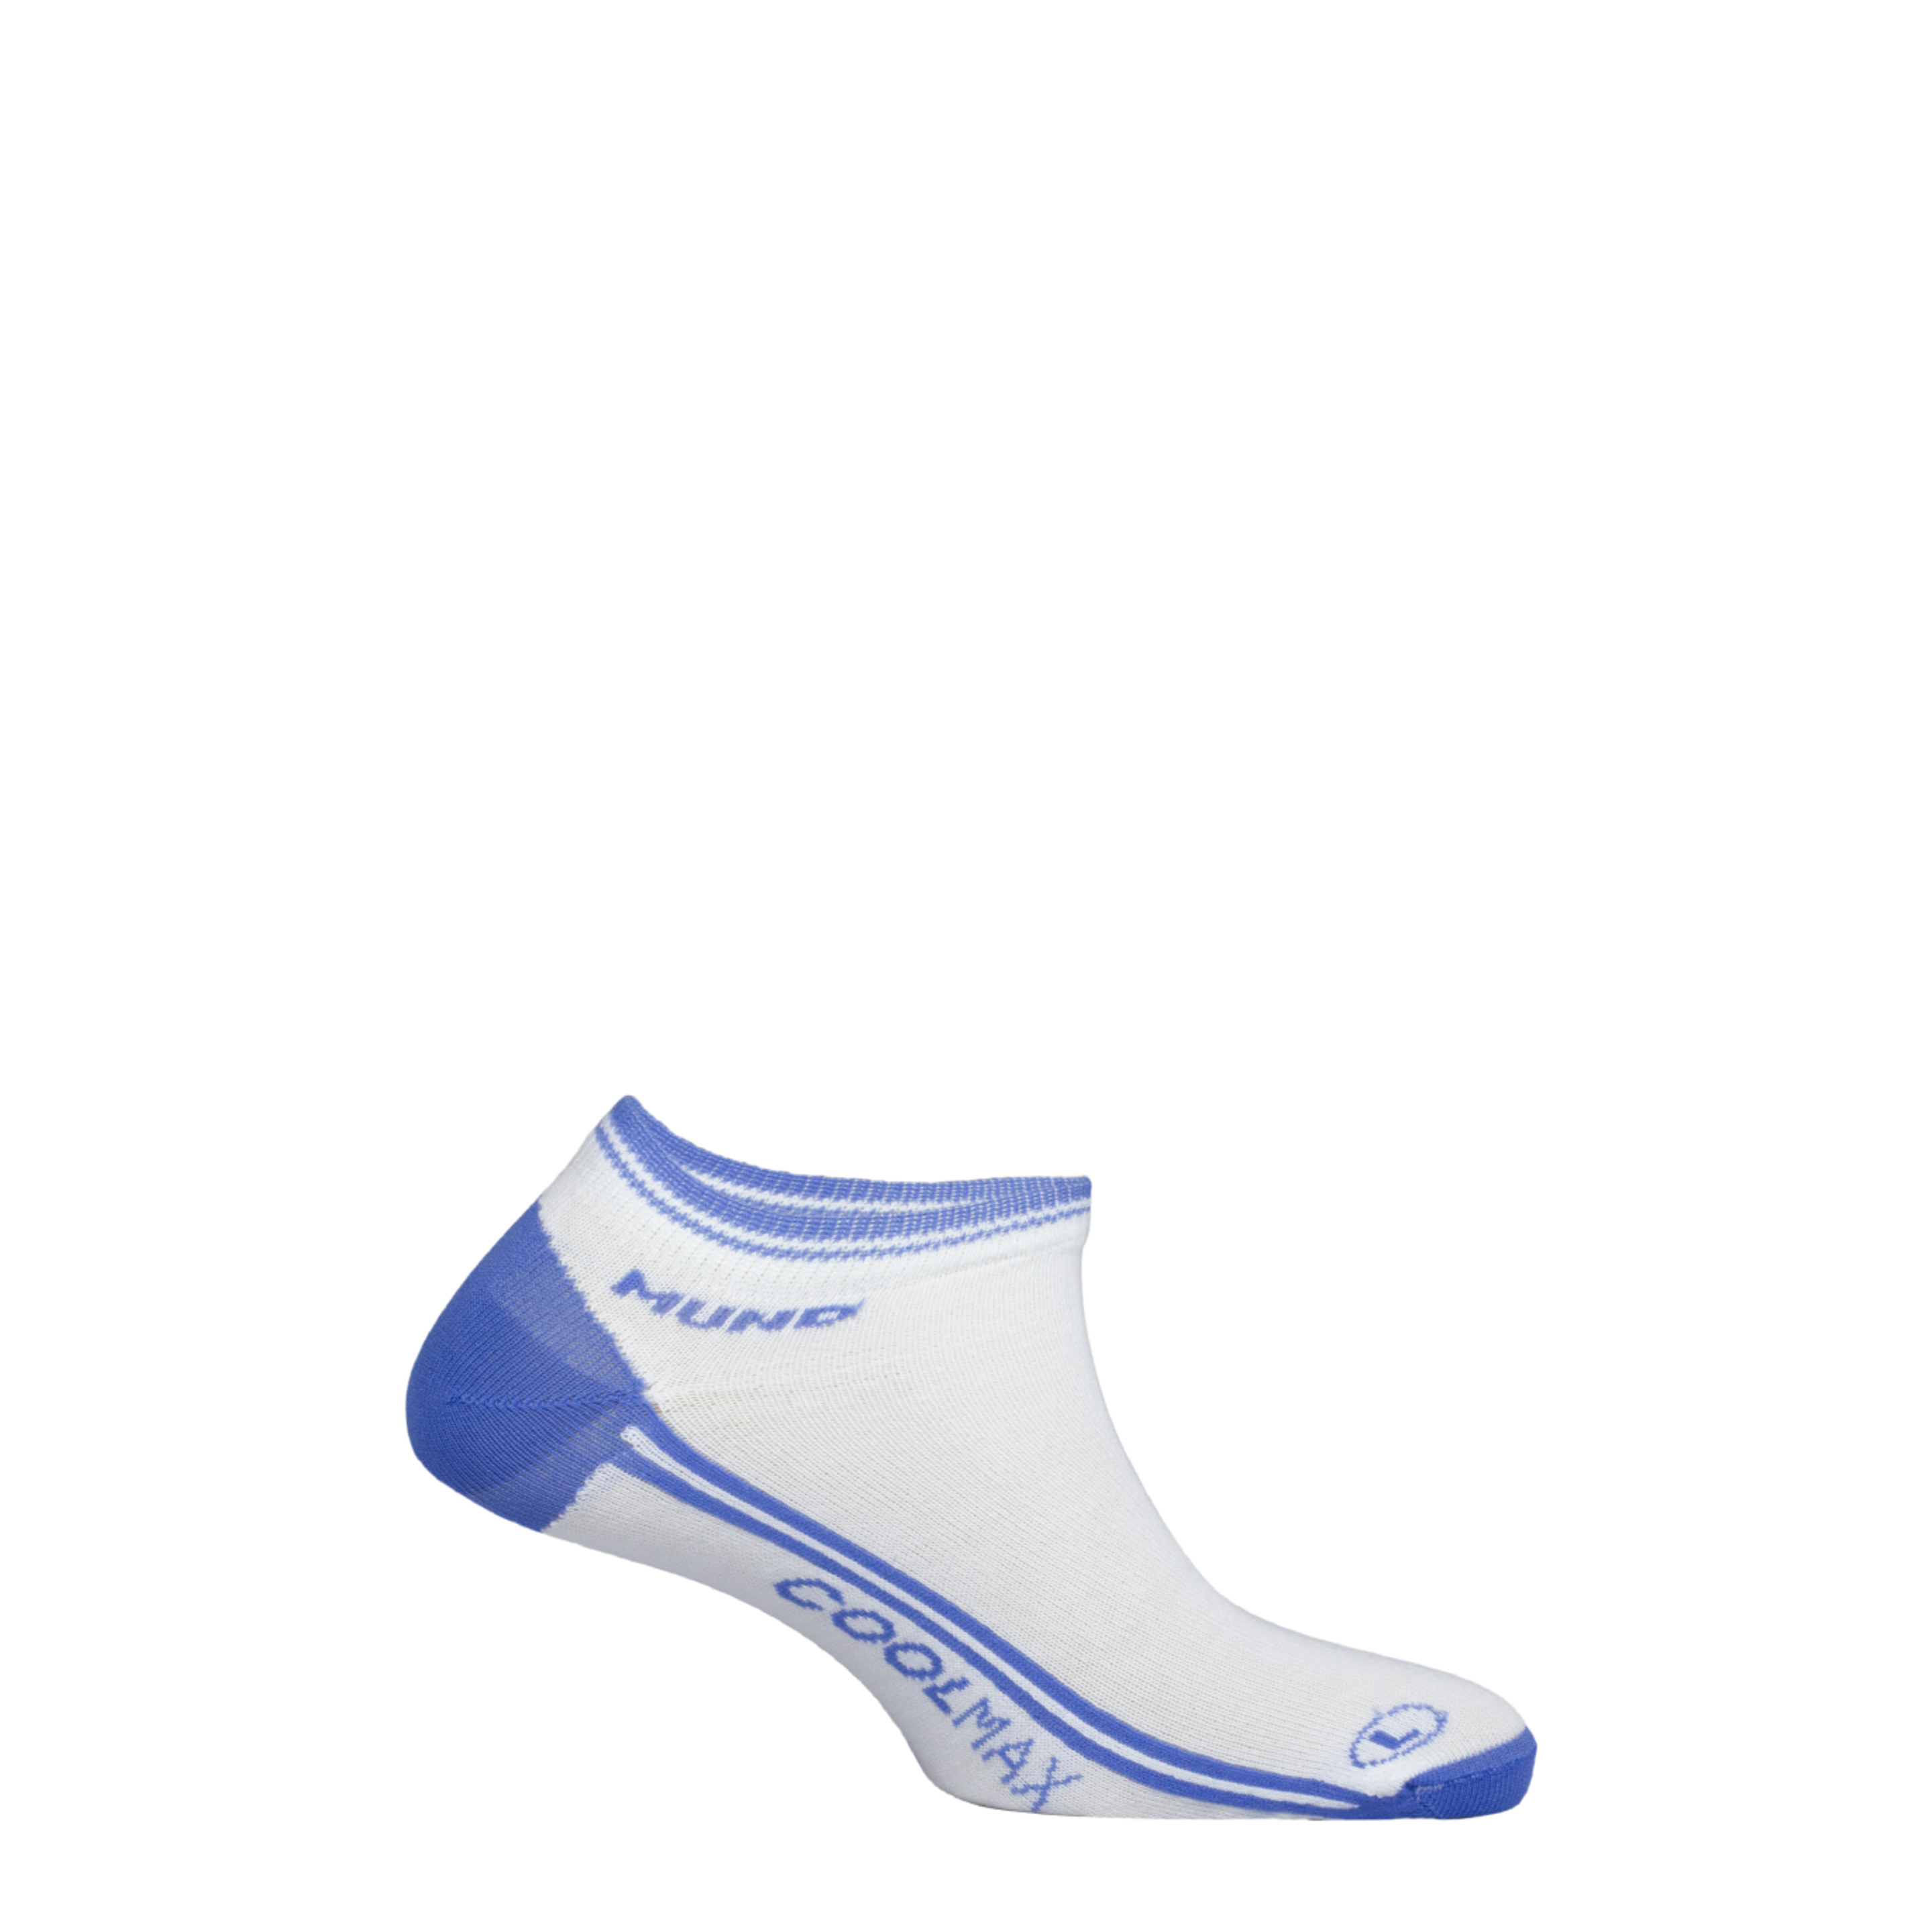 Calcetines Invisible Coolmax® - blanco_azul - Calcetines Fitness  MKP